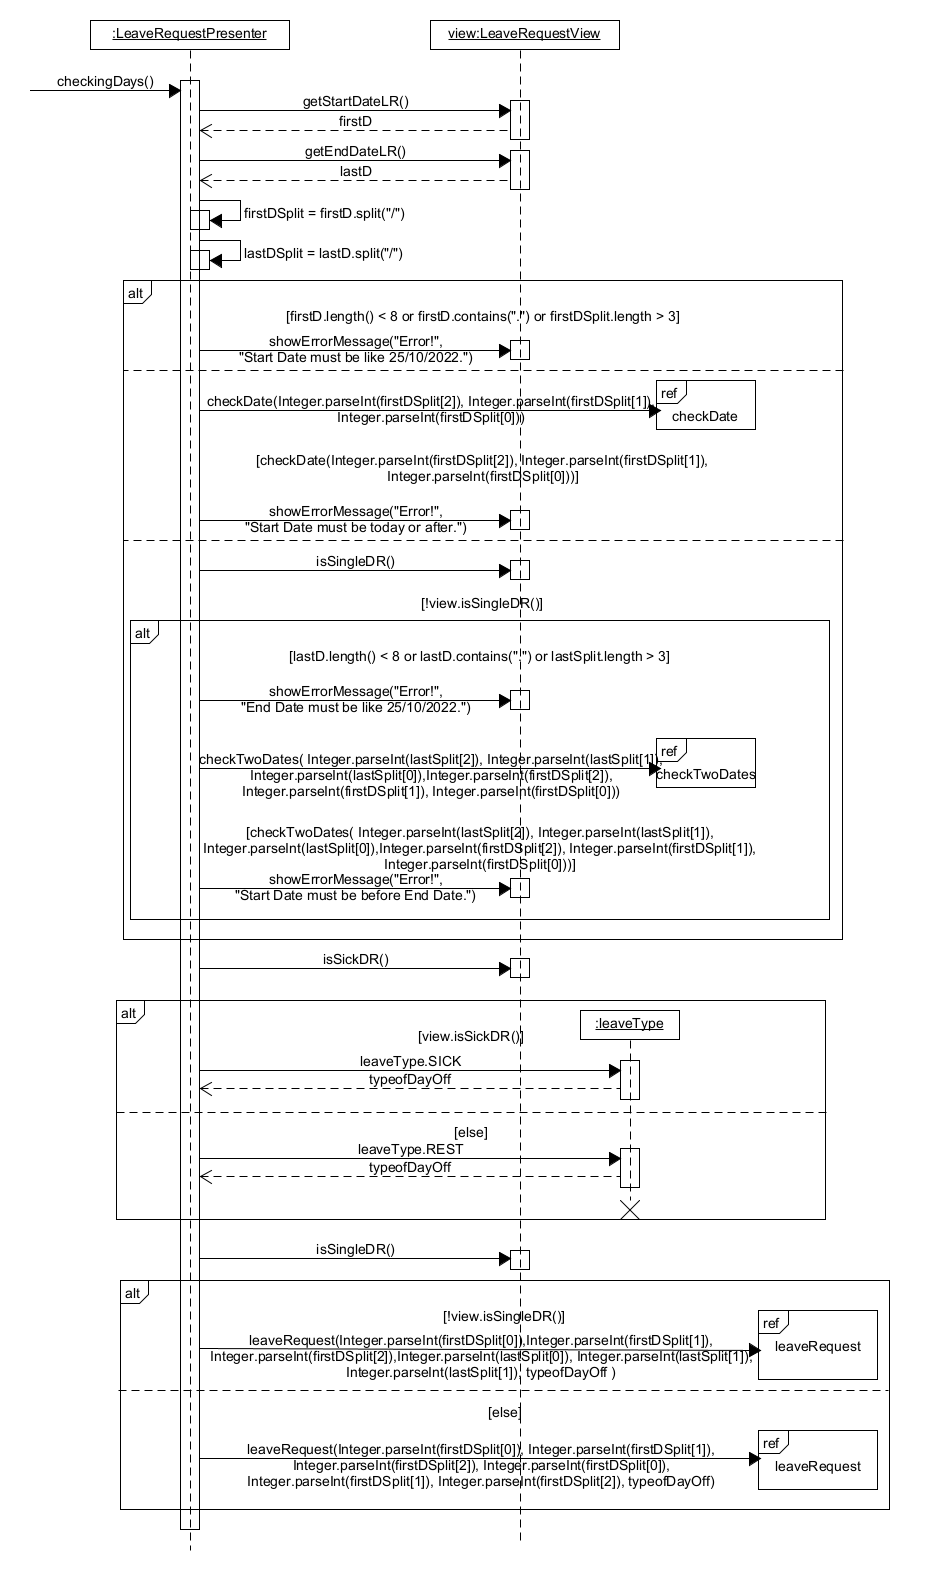 sequence diagram for LeaveRequest